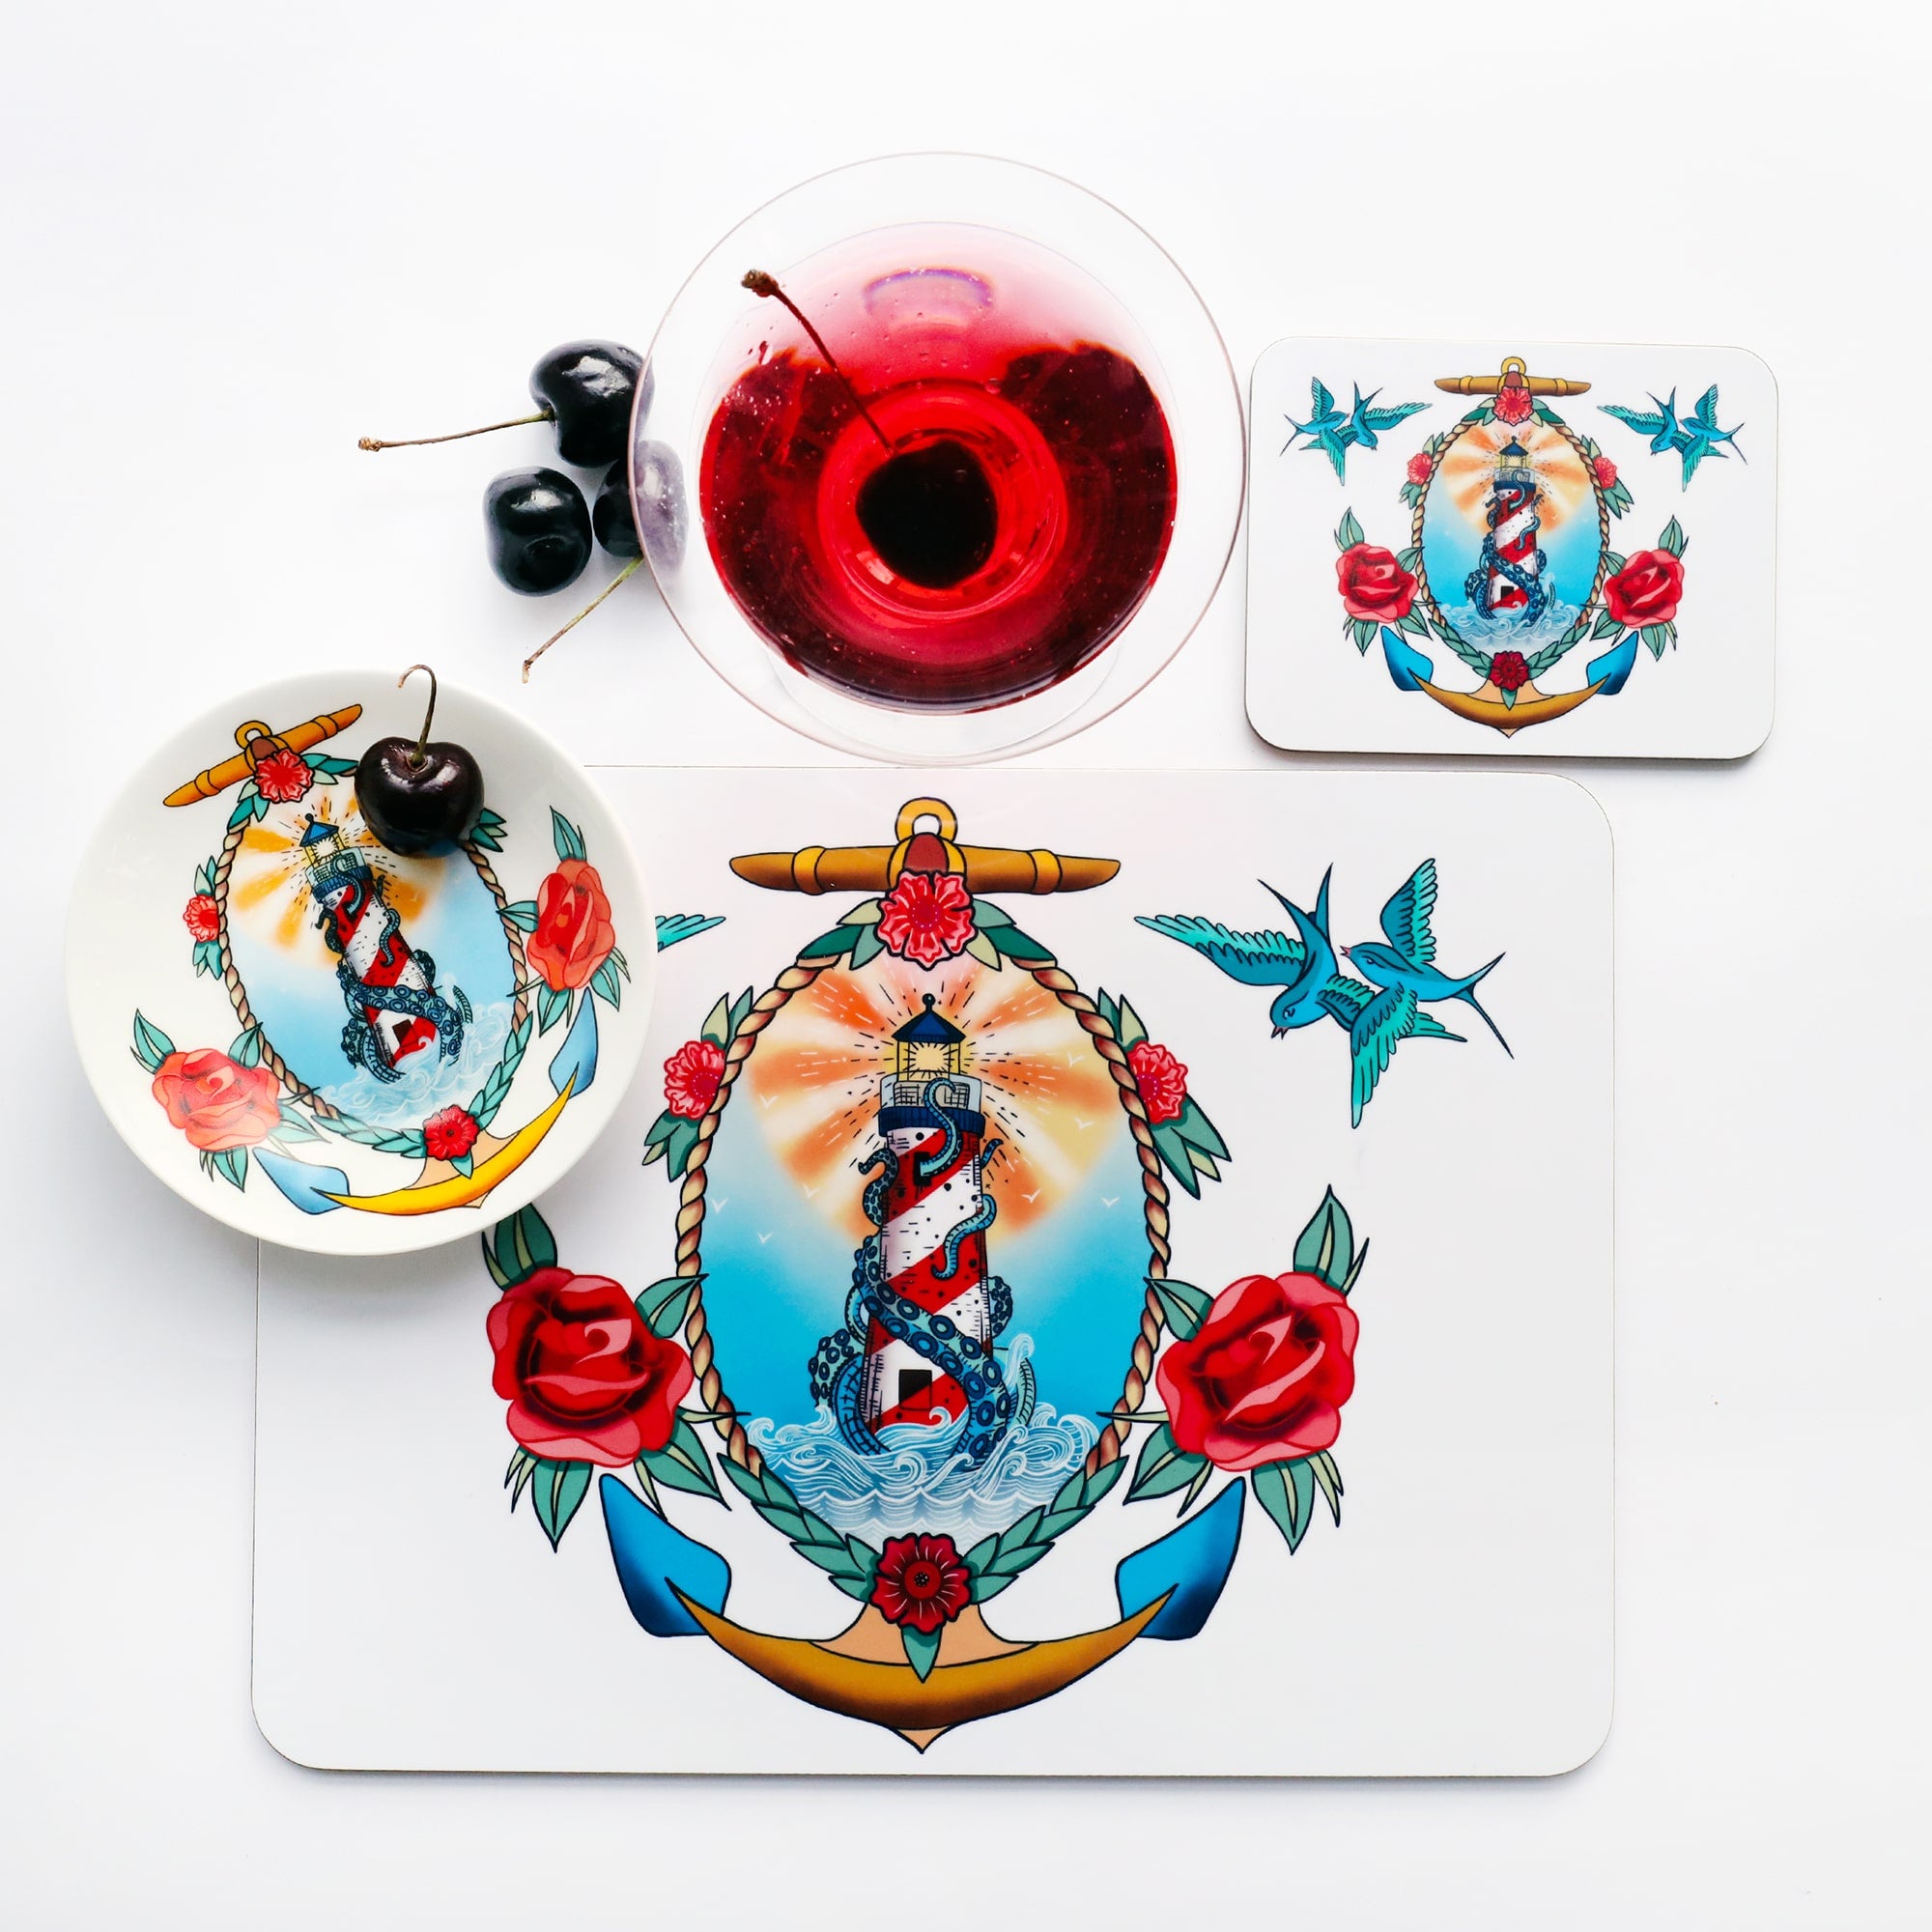 Place setting with placemat, coaster and nibbles dish all the the same lighthouse and kraken design that is inspired by a sailors tattoos. The place setting is shot from above and there is a red cocktail and cherries just above the placemat.